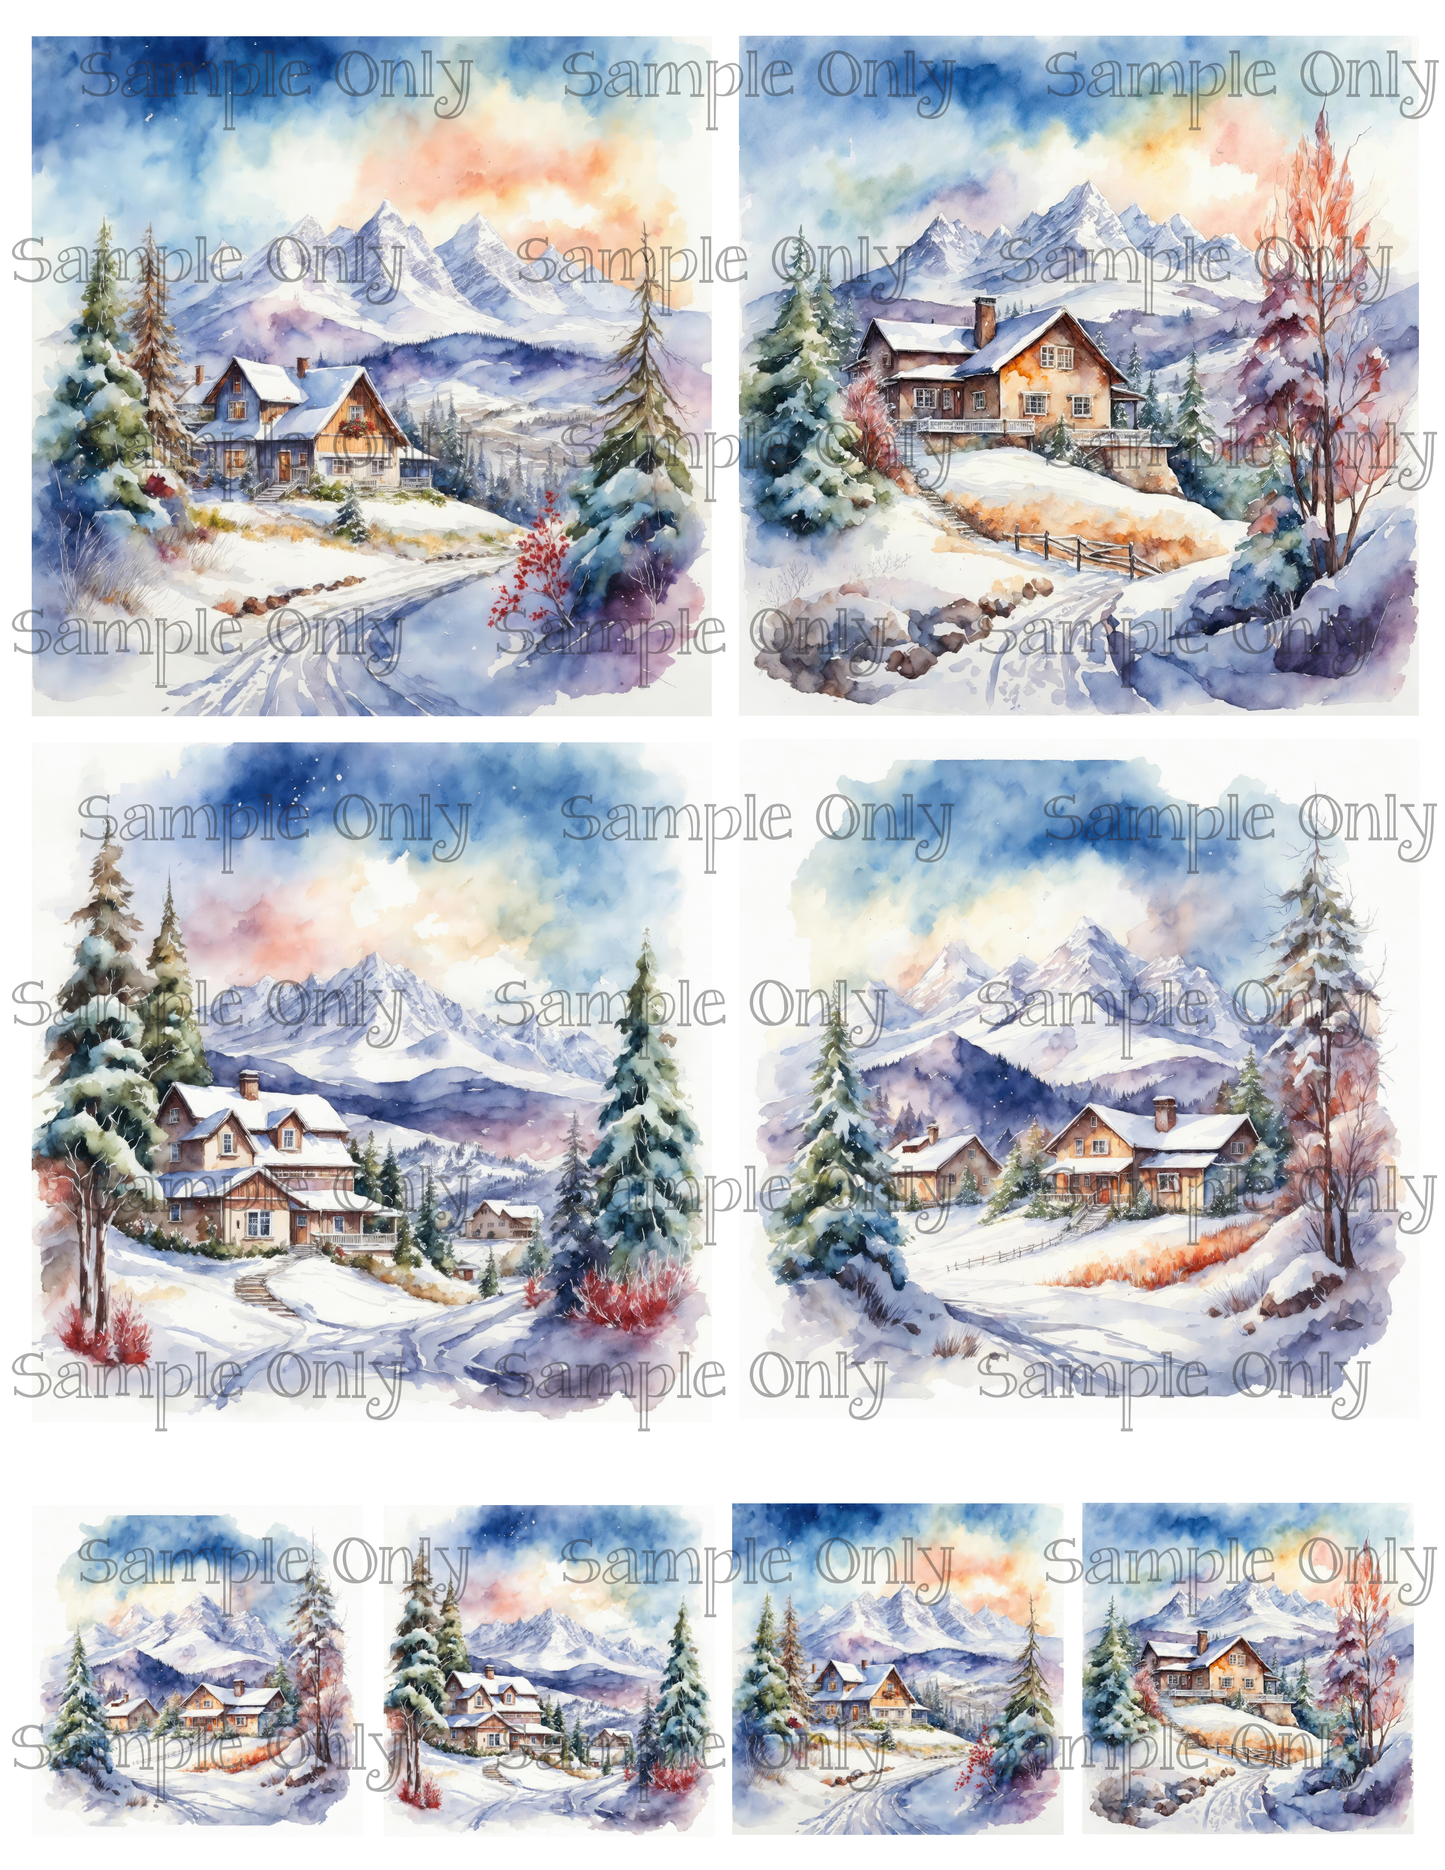 4 Inch Watercolor Winter Forest Landscape Image Sheet For Polymer Clay Transfer Decal DIGITAL FILE OR PRINTED